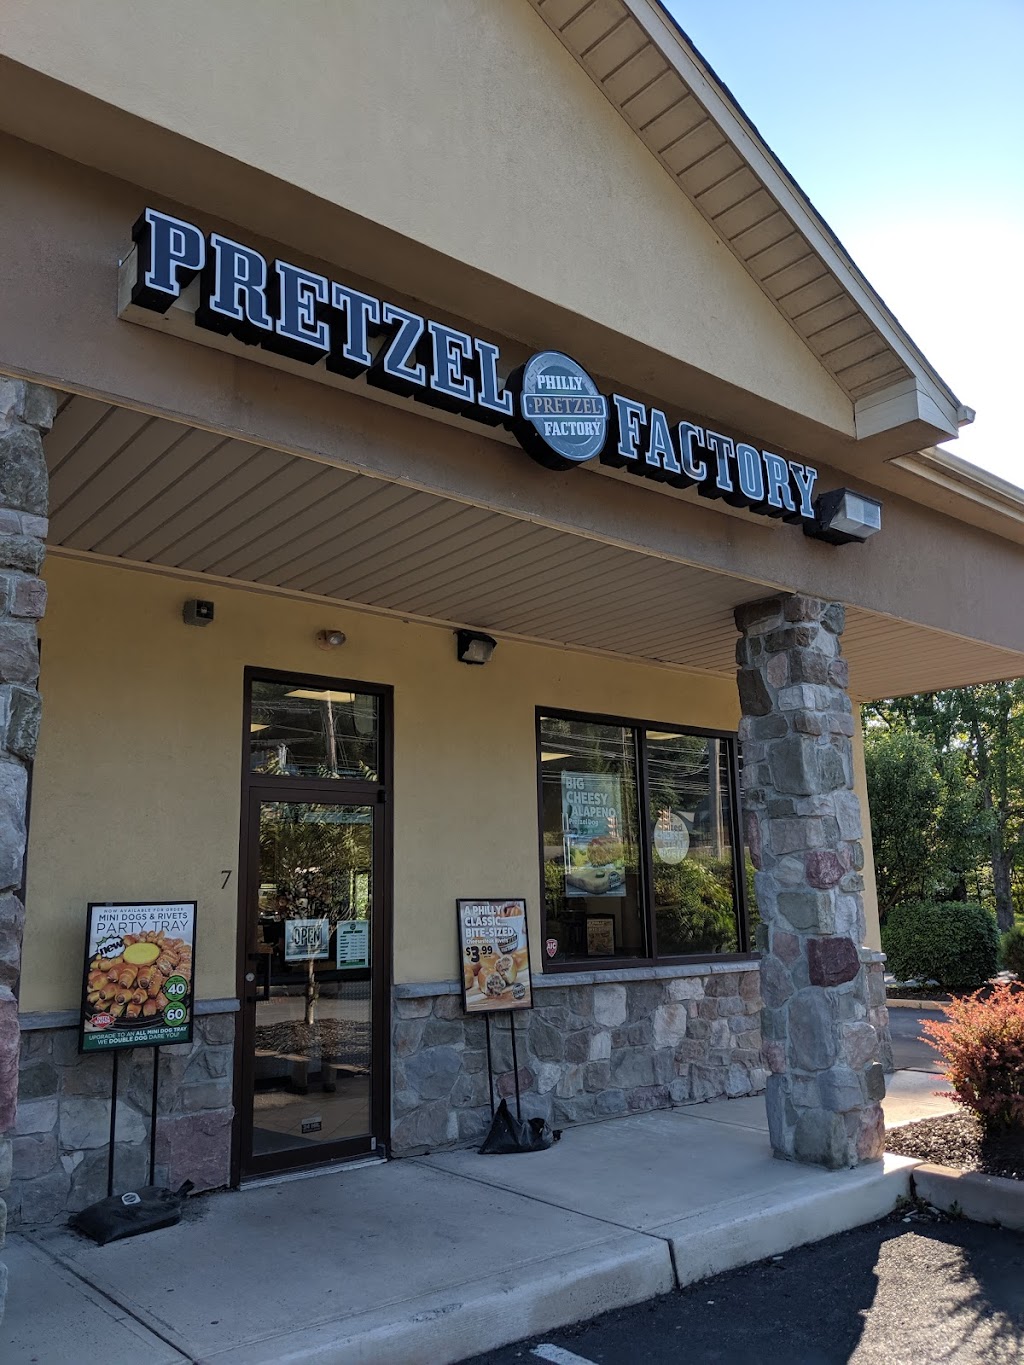 Philly Pretzel Factory | 1619 N 9th St, Stroudsburg, PA 18360 | Phone: (570) 369-4533